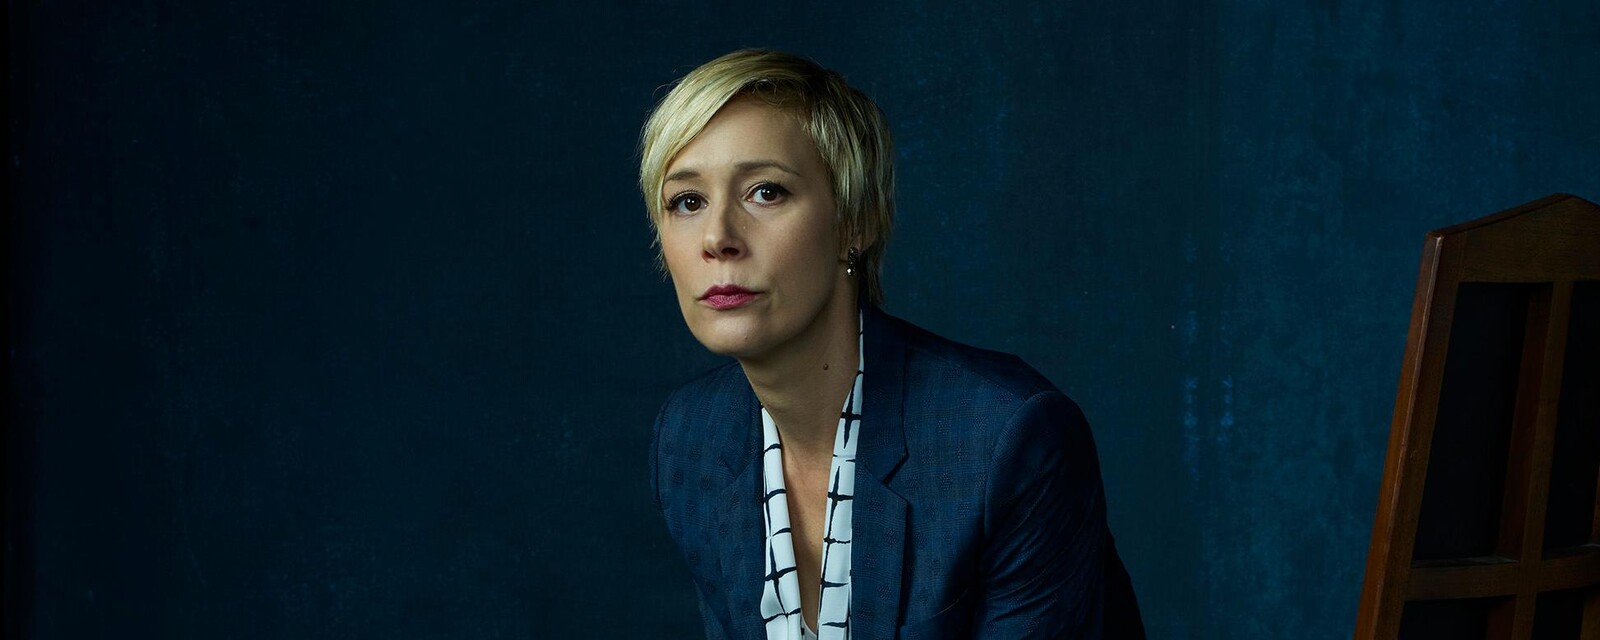 Liza weil images